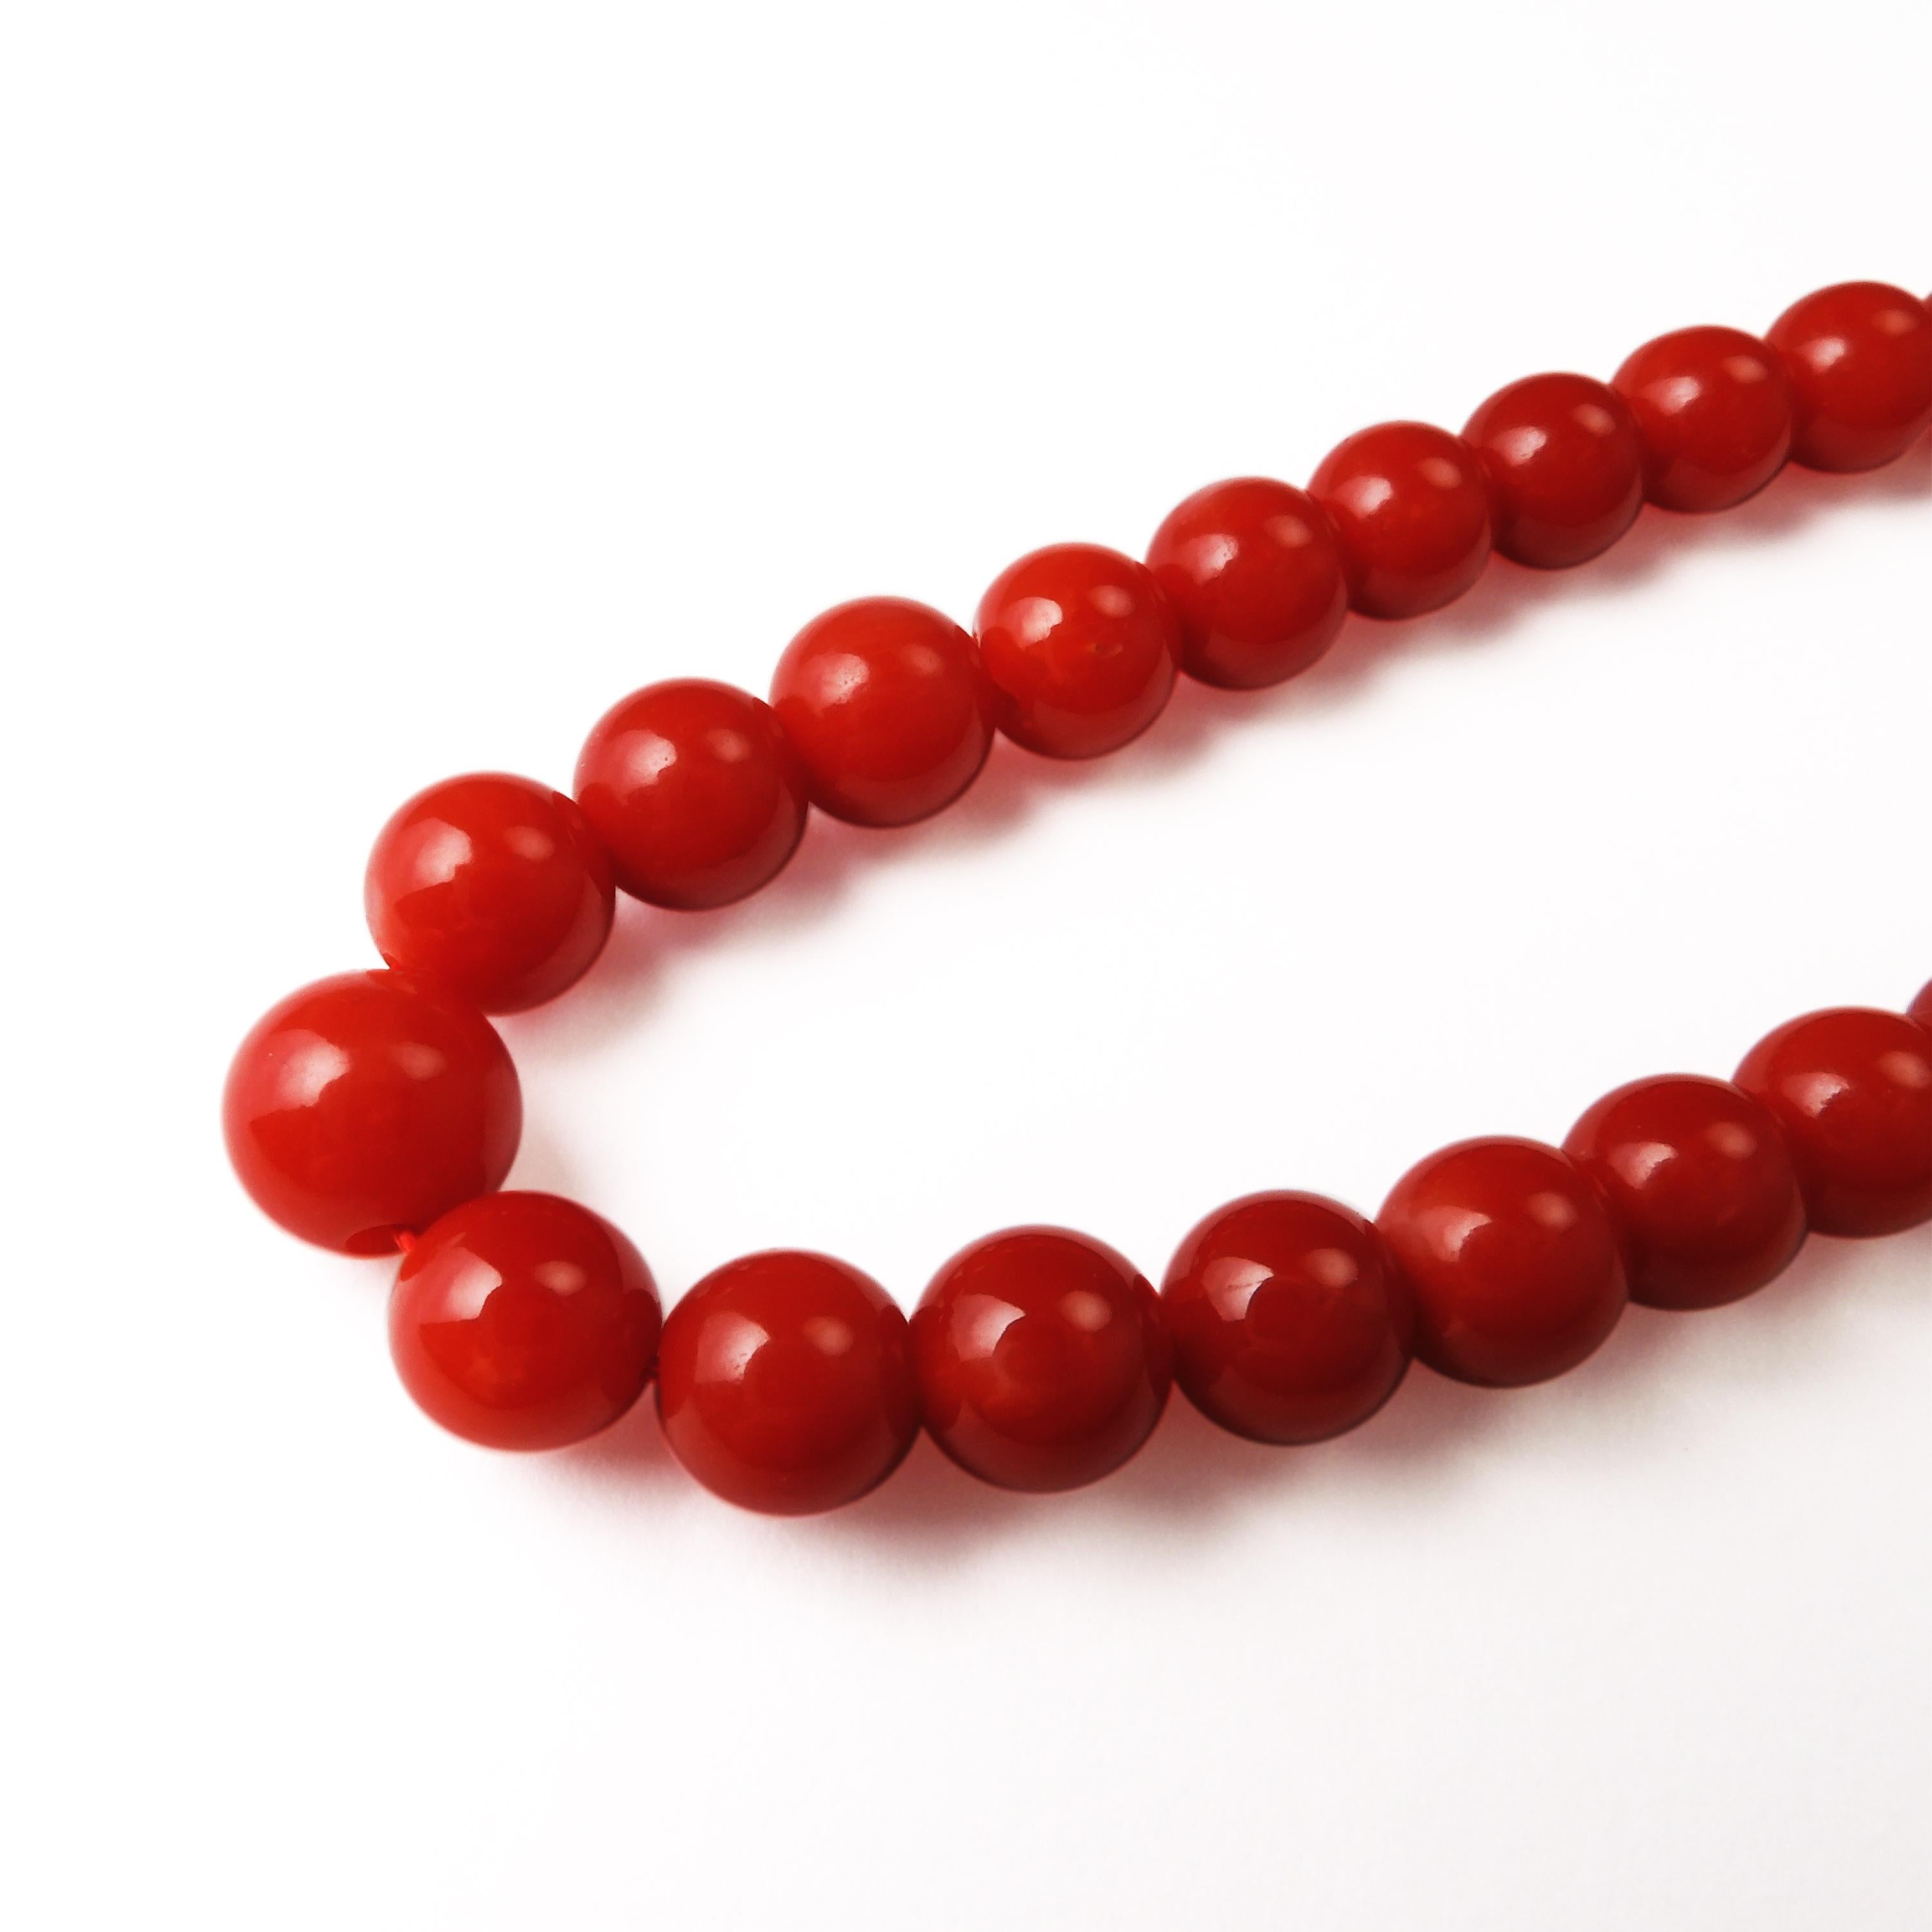 Japanese Chiaka Sango (Oxblood Coral) has a white core, so when you make beads for these kinds of necklaces, a white spot will inevitably appear somewhere. For this necklace, the white spot has been removed piece by piece and carefully polished to